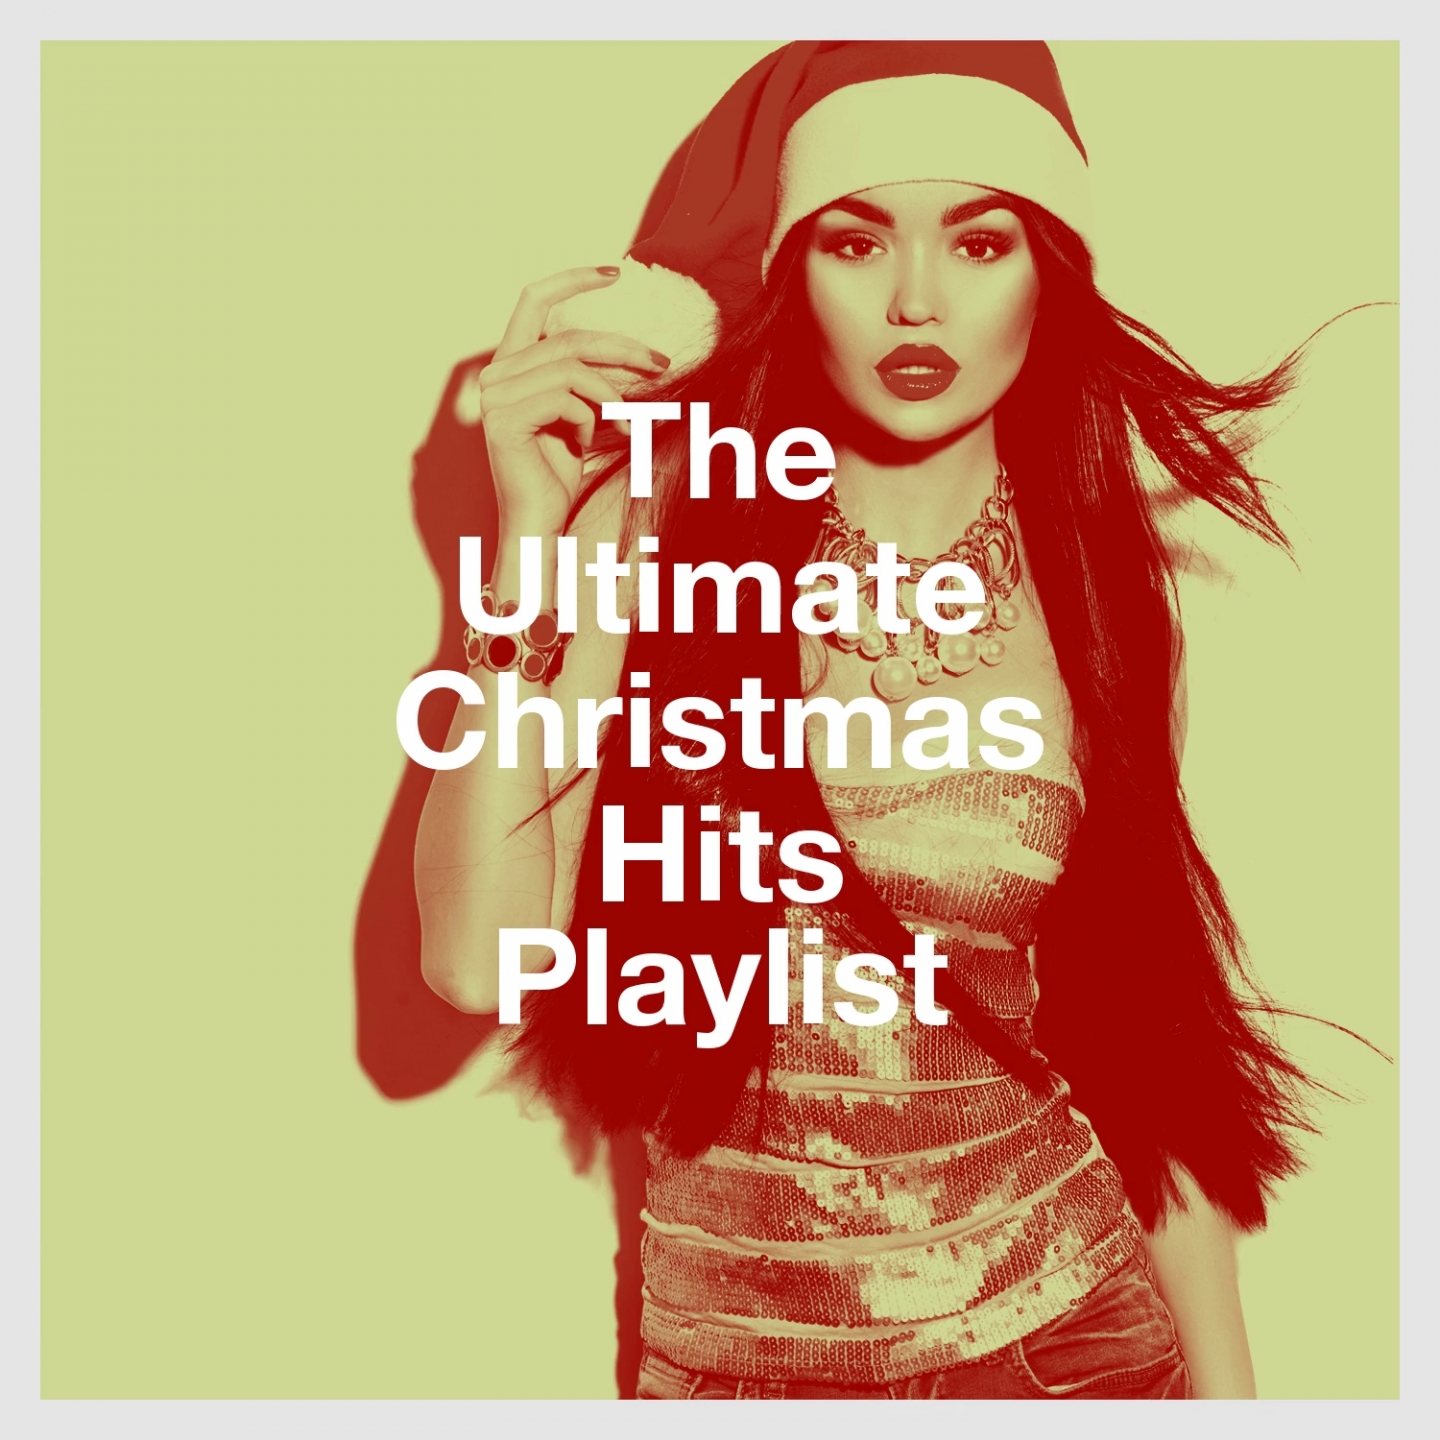 The Ultimate Christmas Hits Playlist